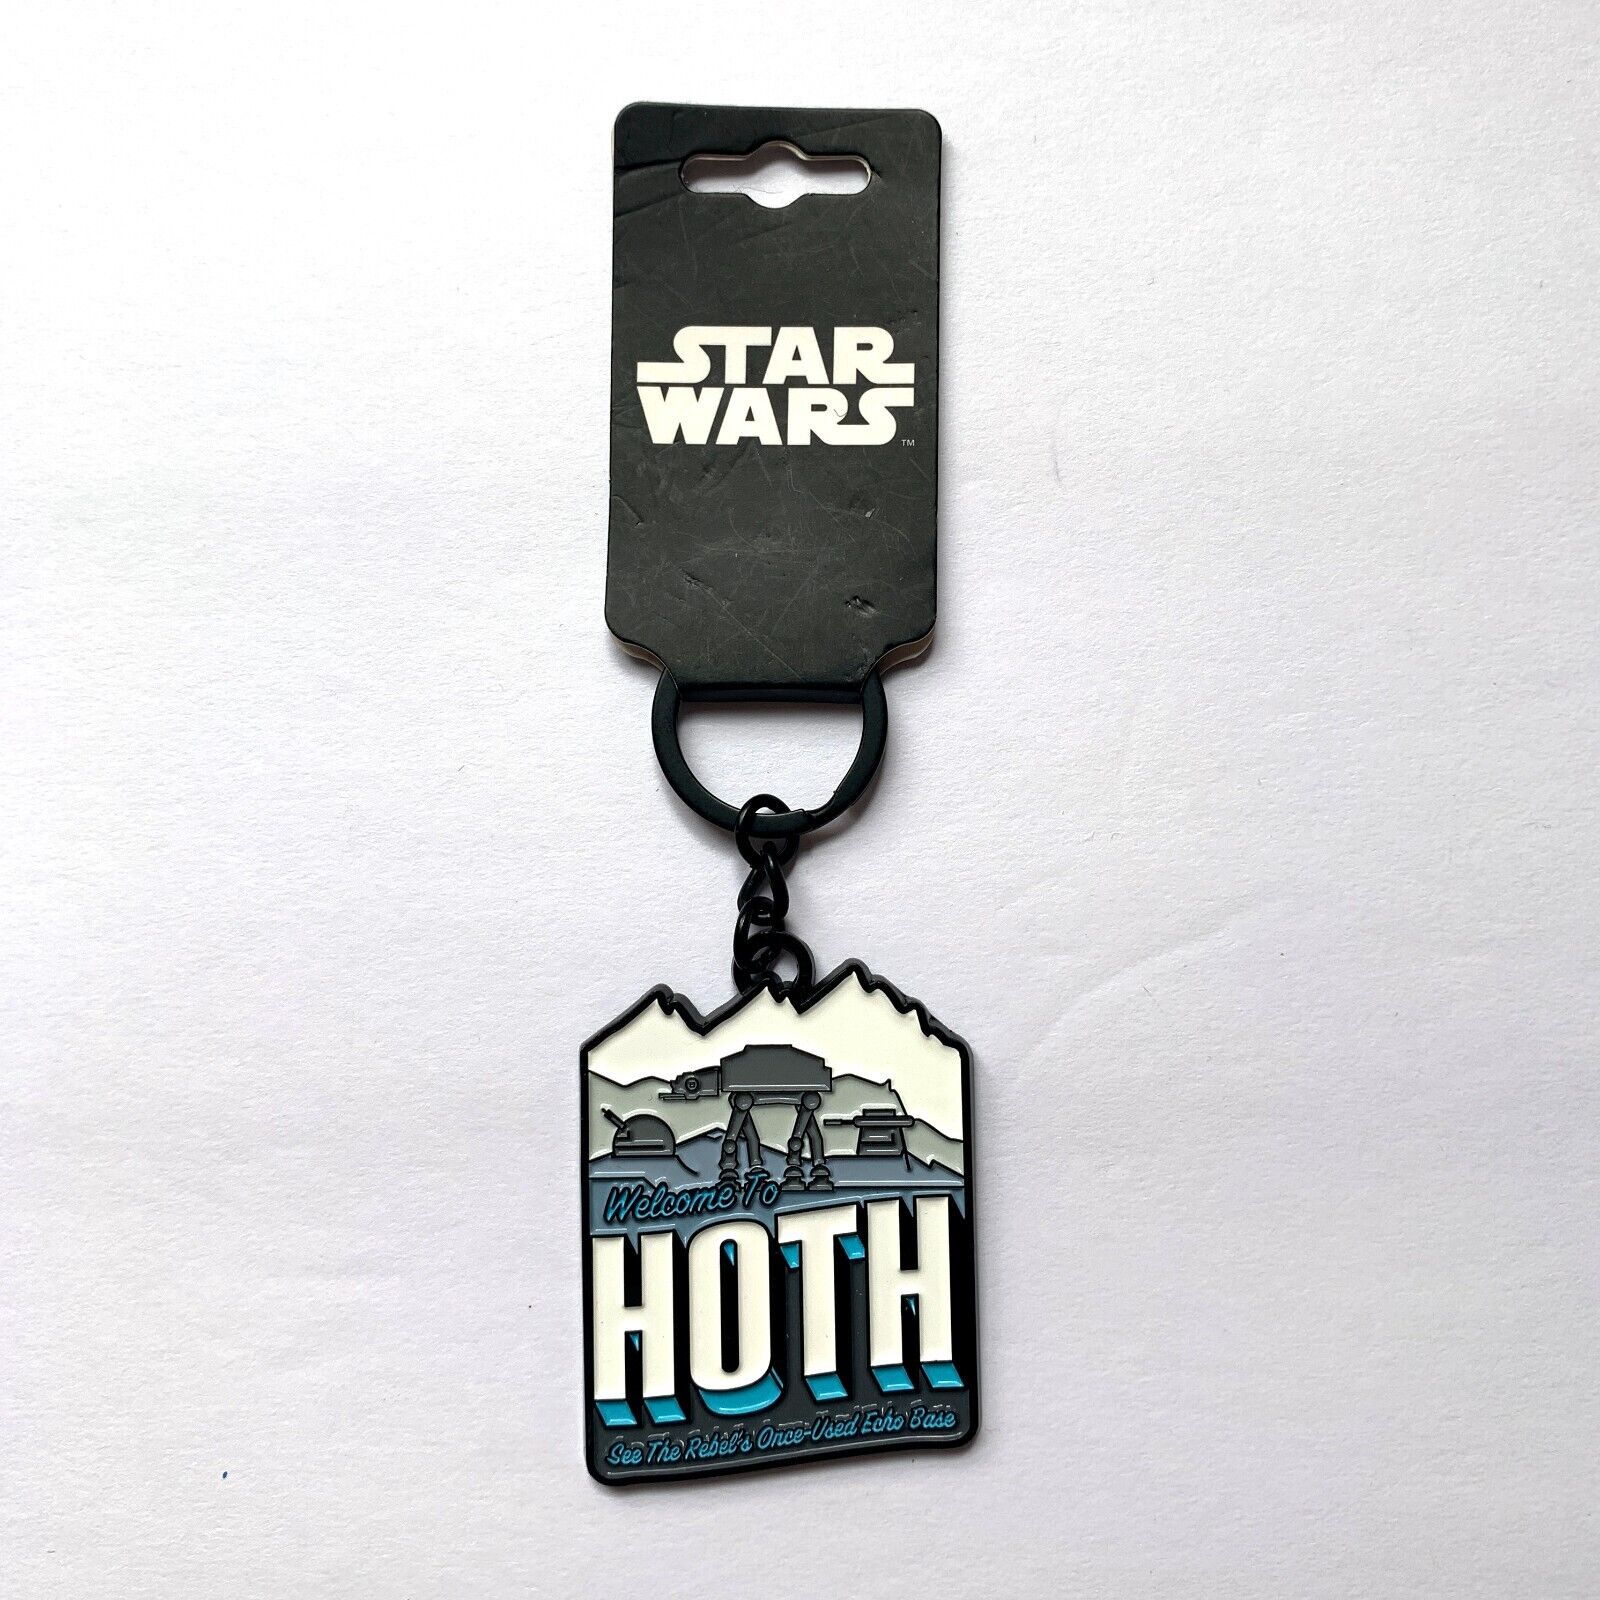 Star Wars Welcome To Hoth Keychain AT Walker